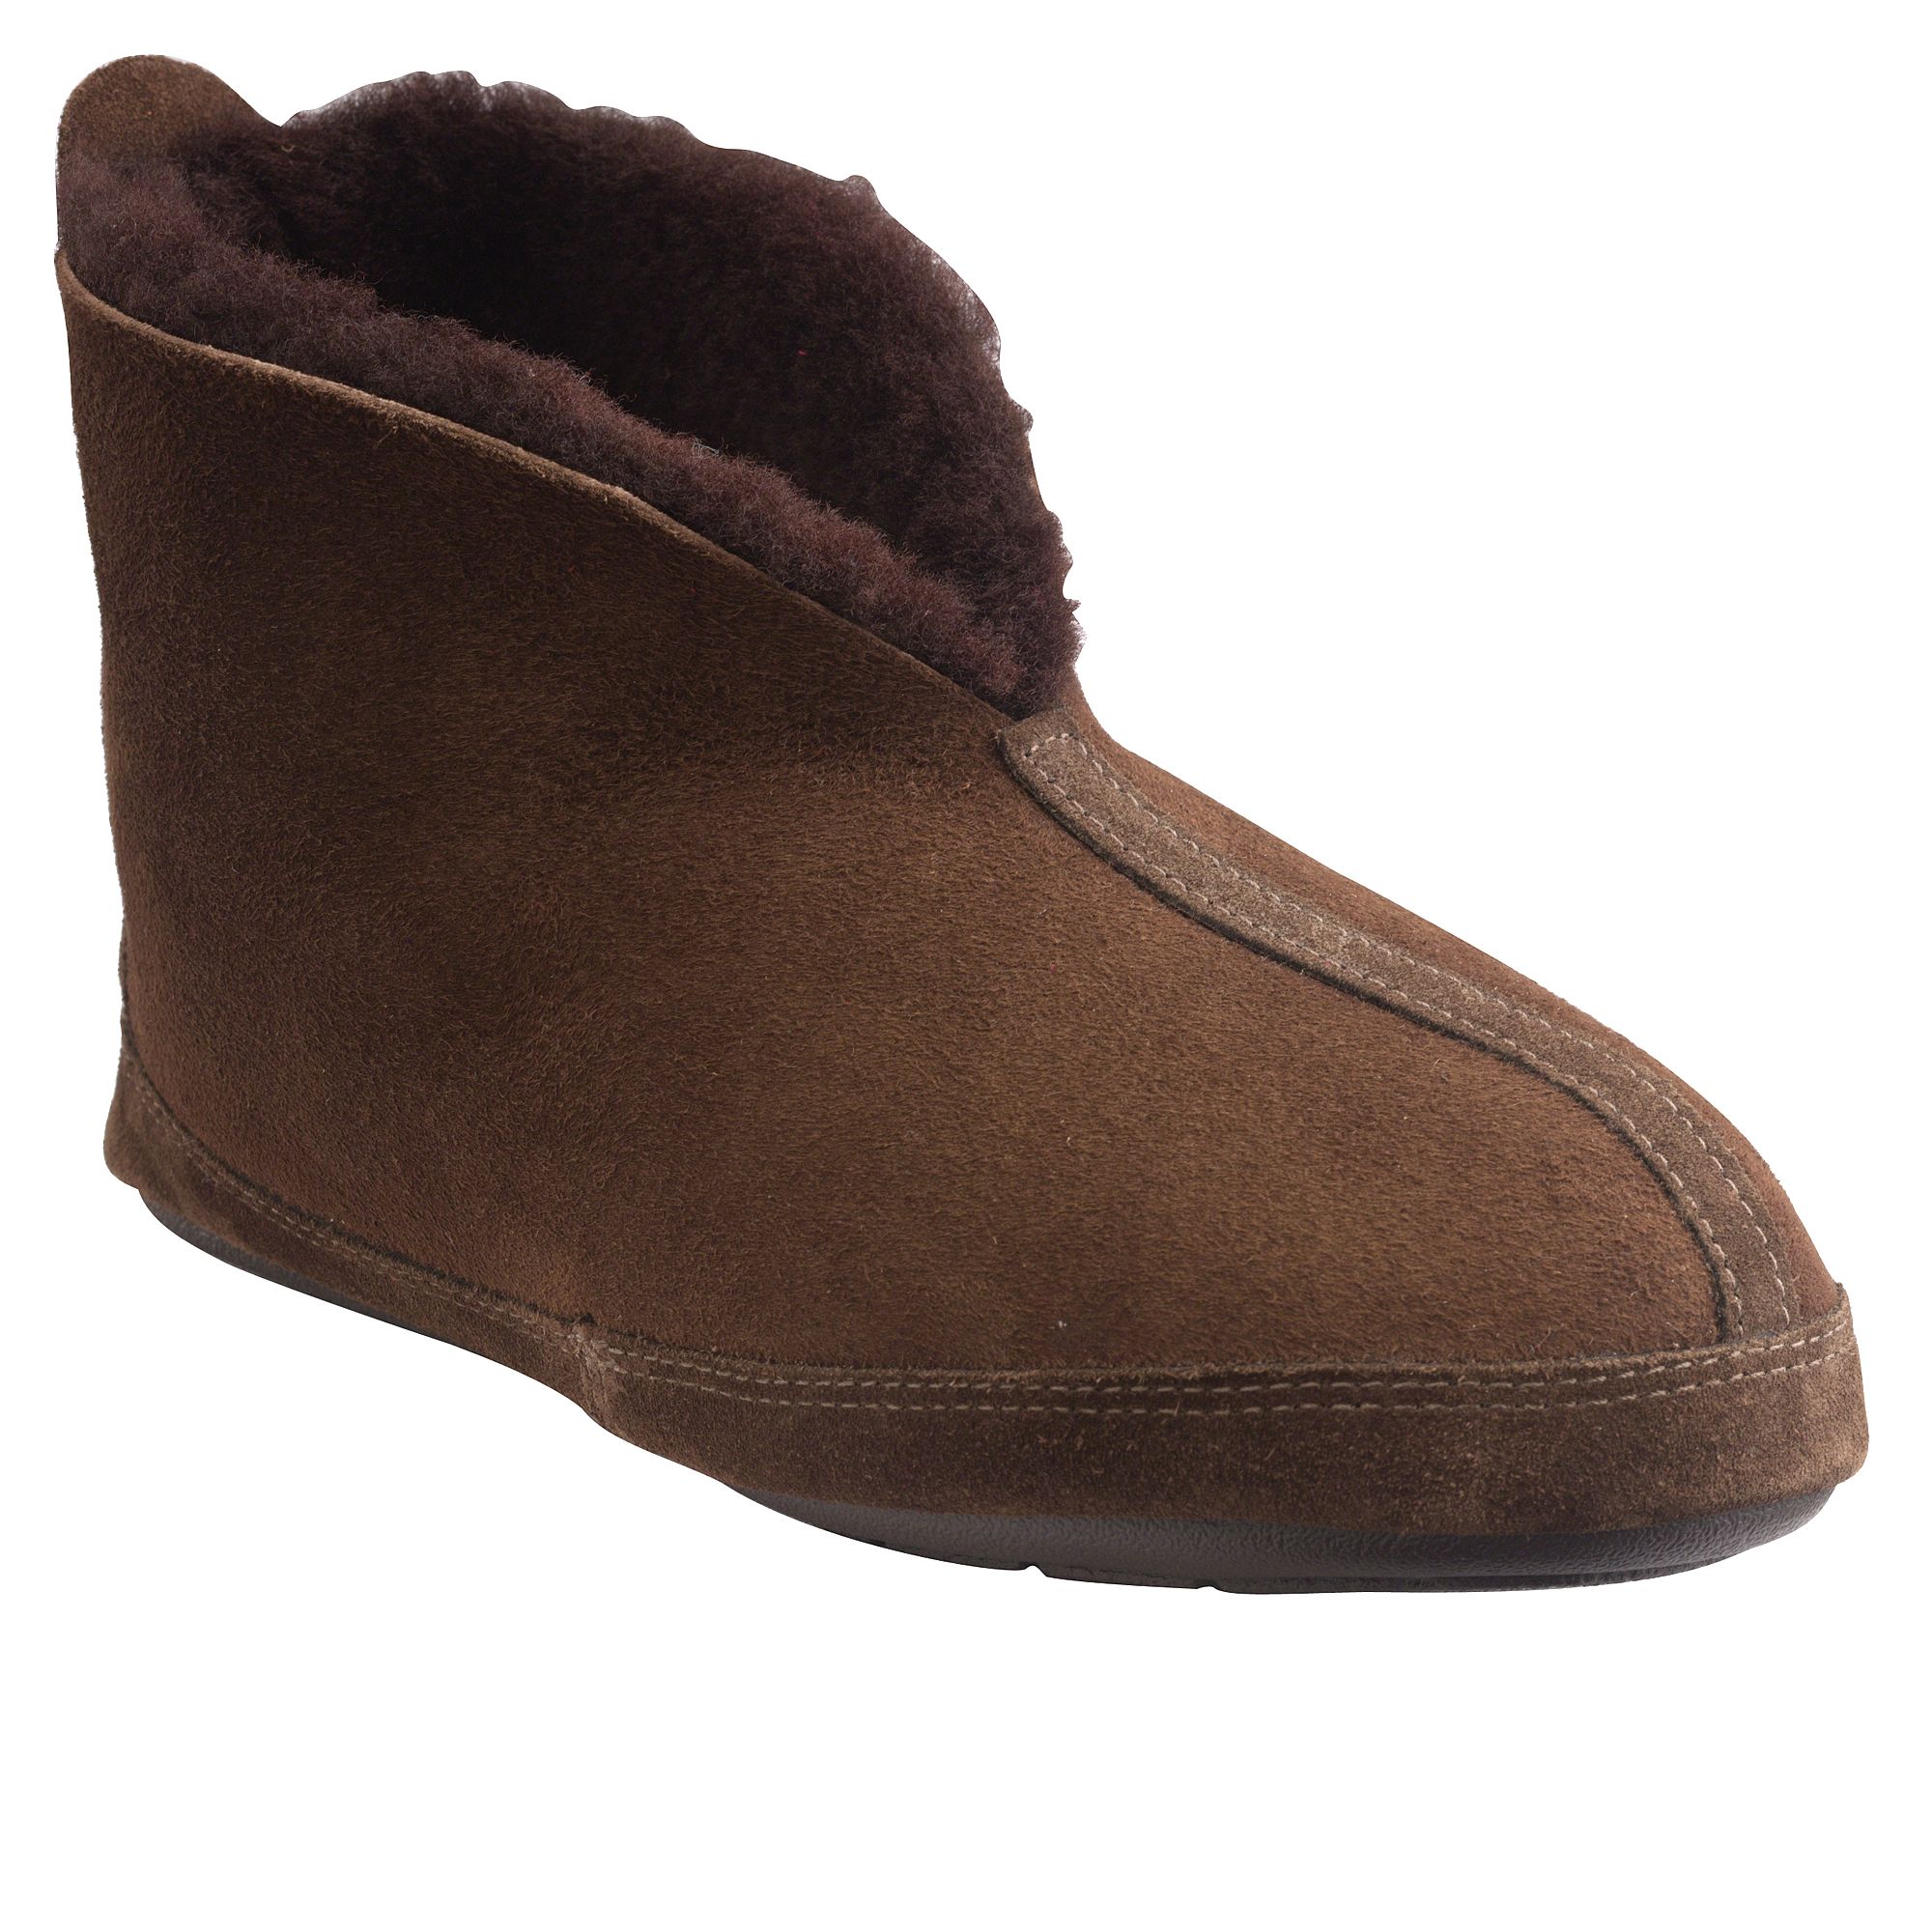 Lands' End Mens Shearling Ankle Boot Slippers